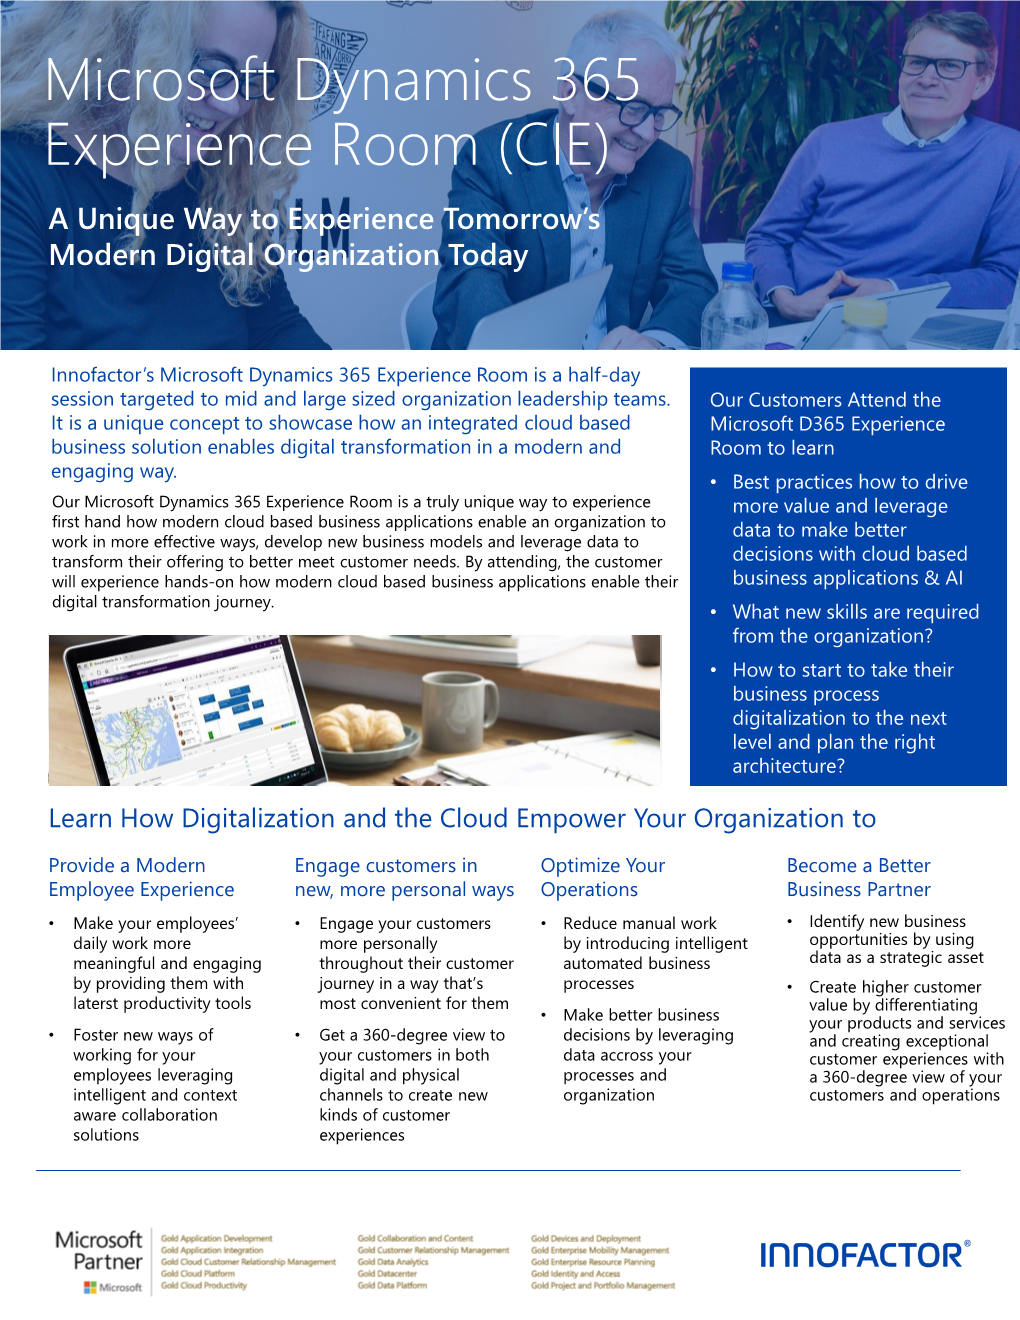 Microsoft Dynamics 365 Experience Room (CIE) a Unique Way to Experience Tomorrow’S Modern Digital Organization Today